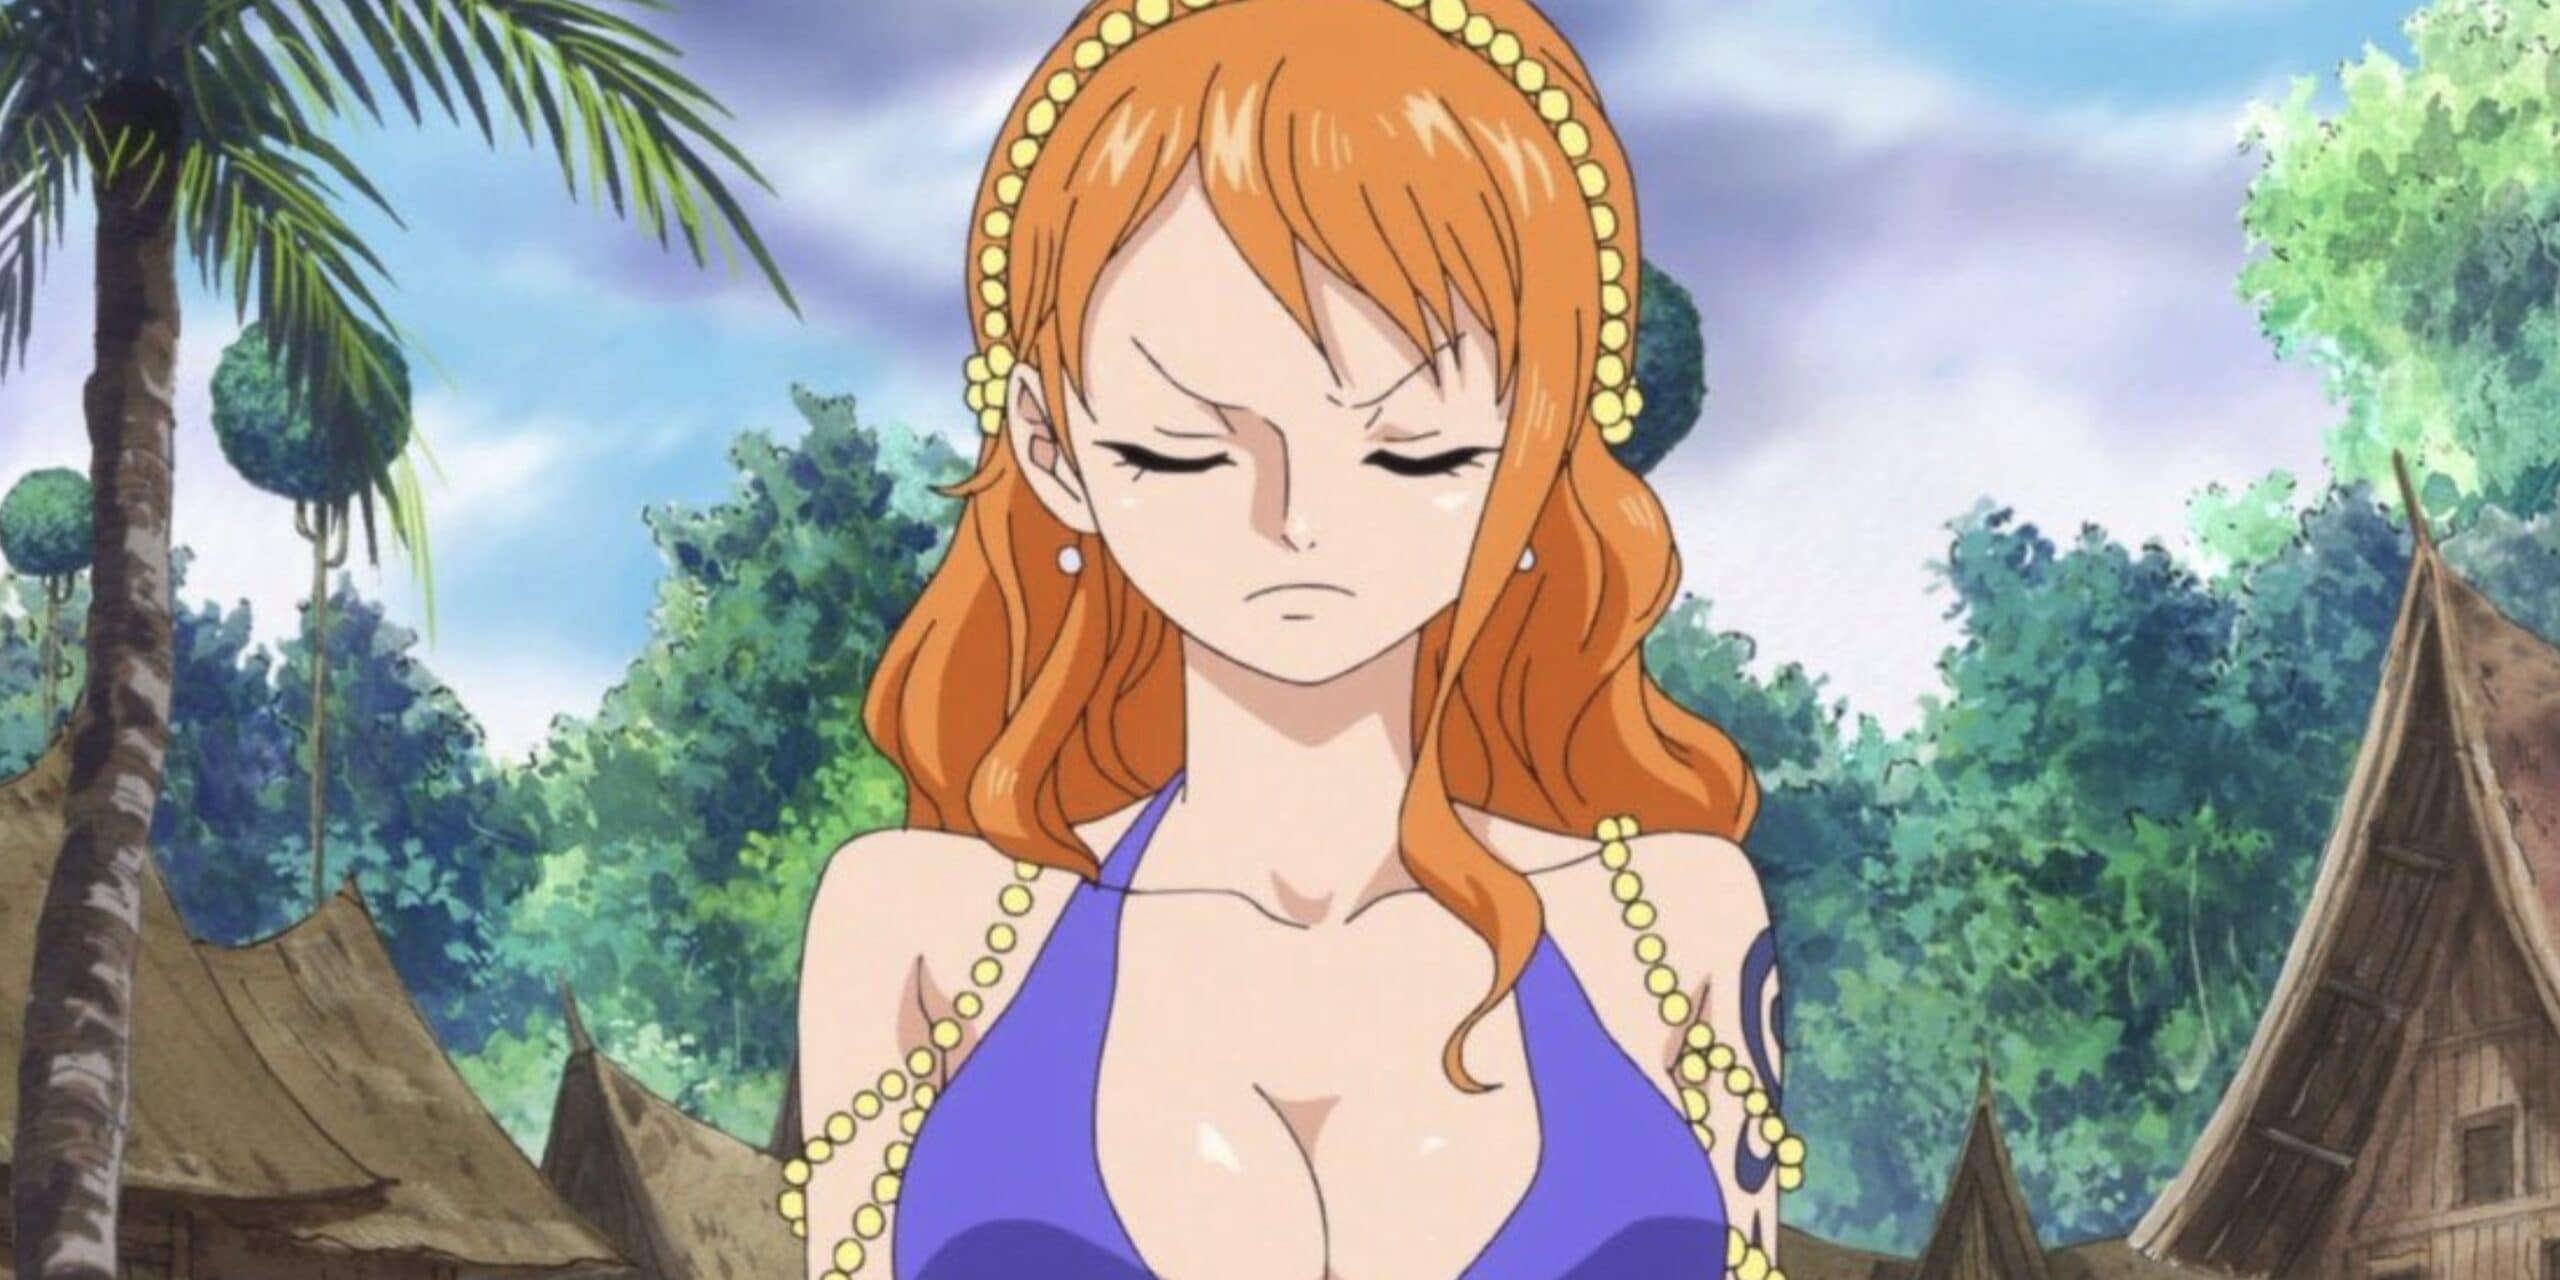 The Real Reason Why Nami Wears Revealing Outfits